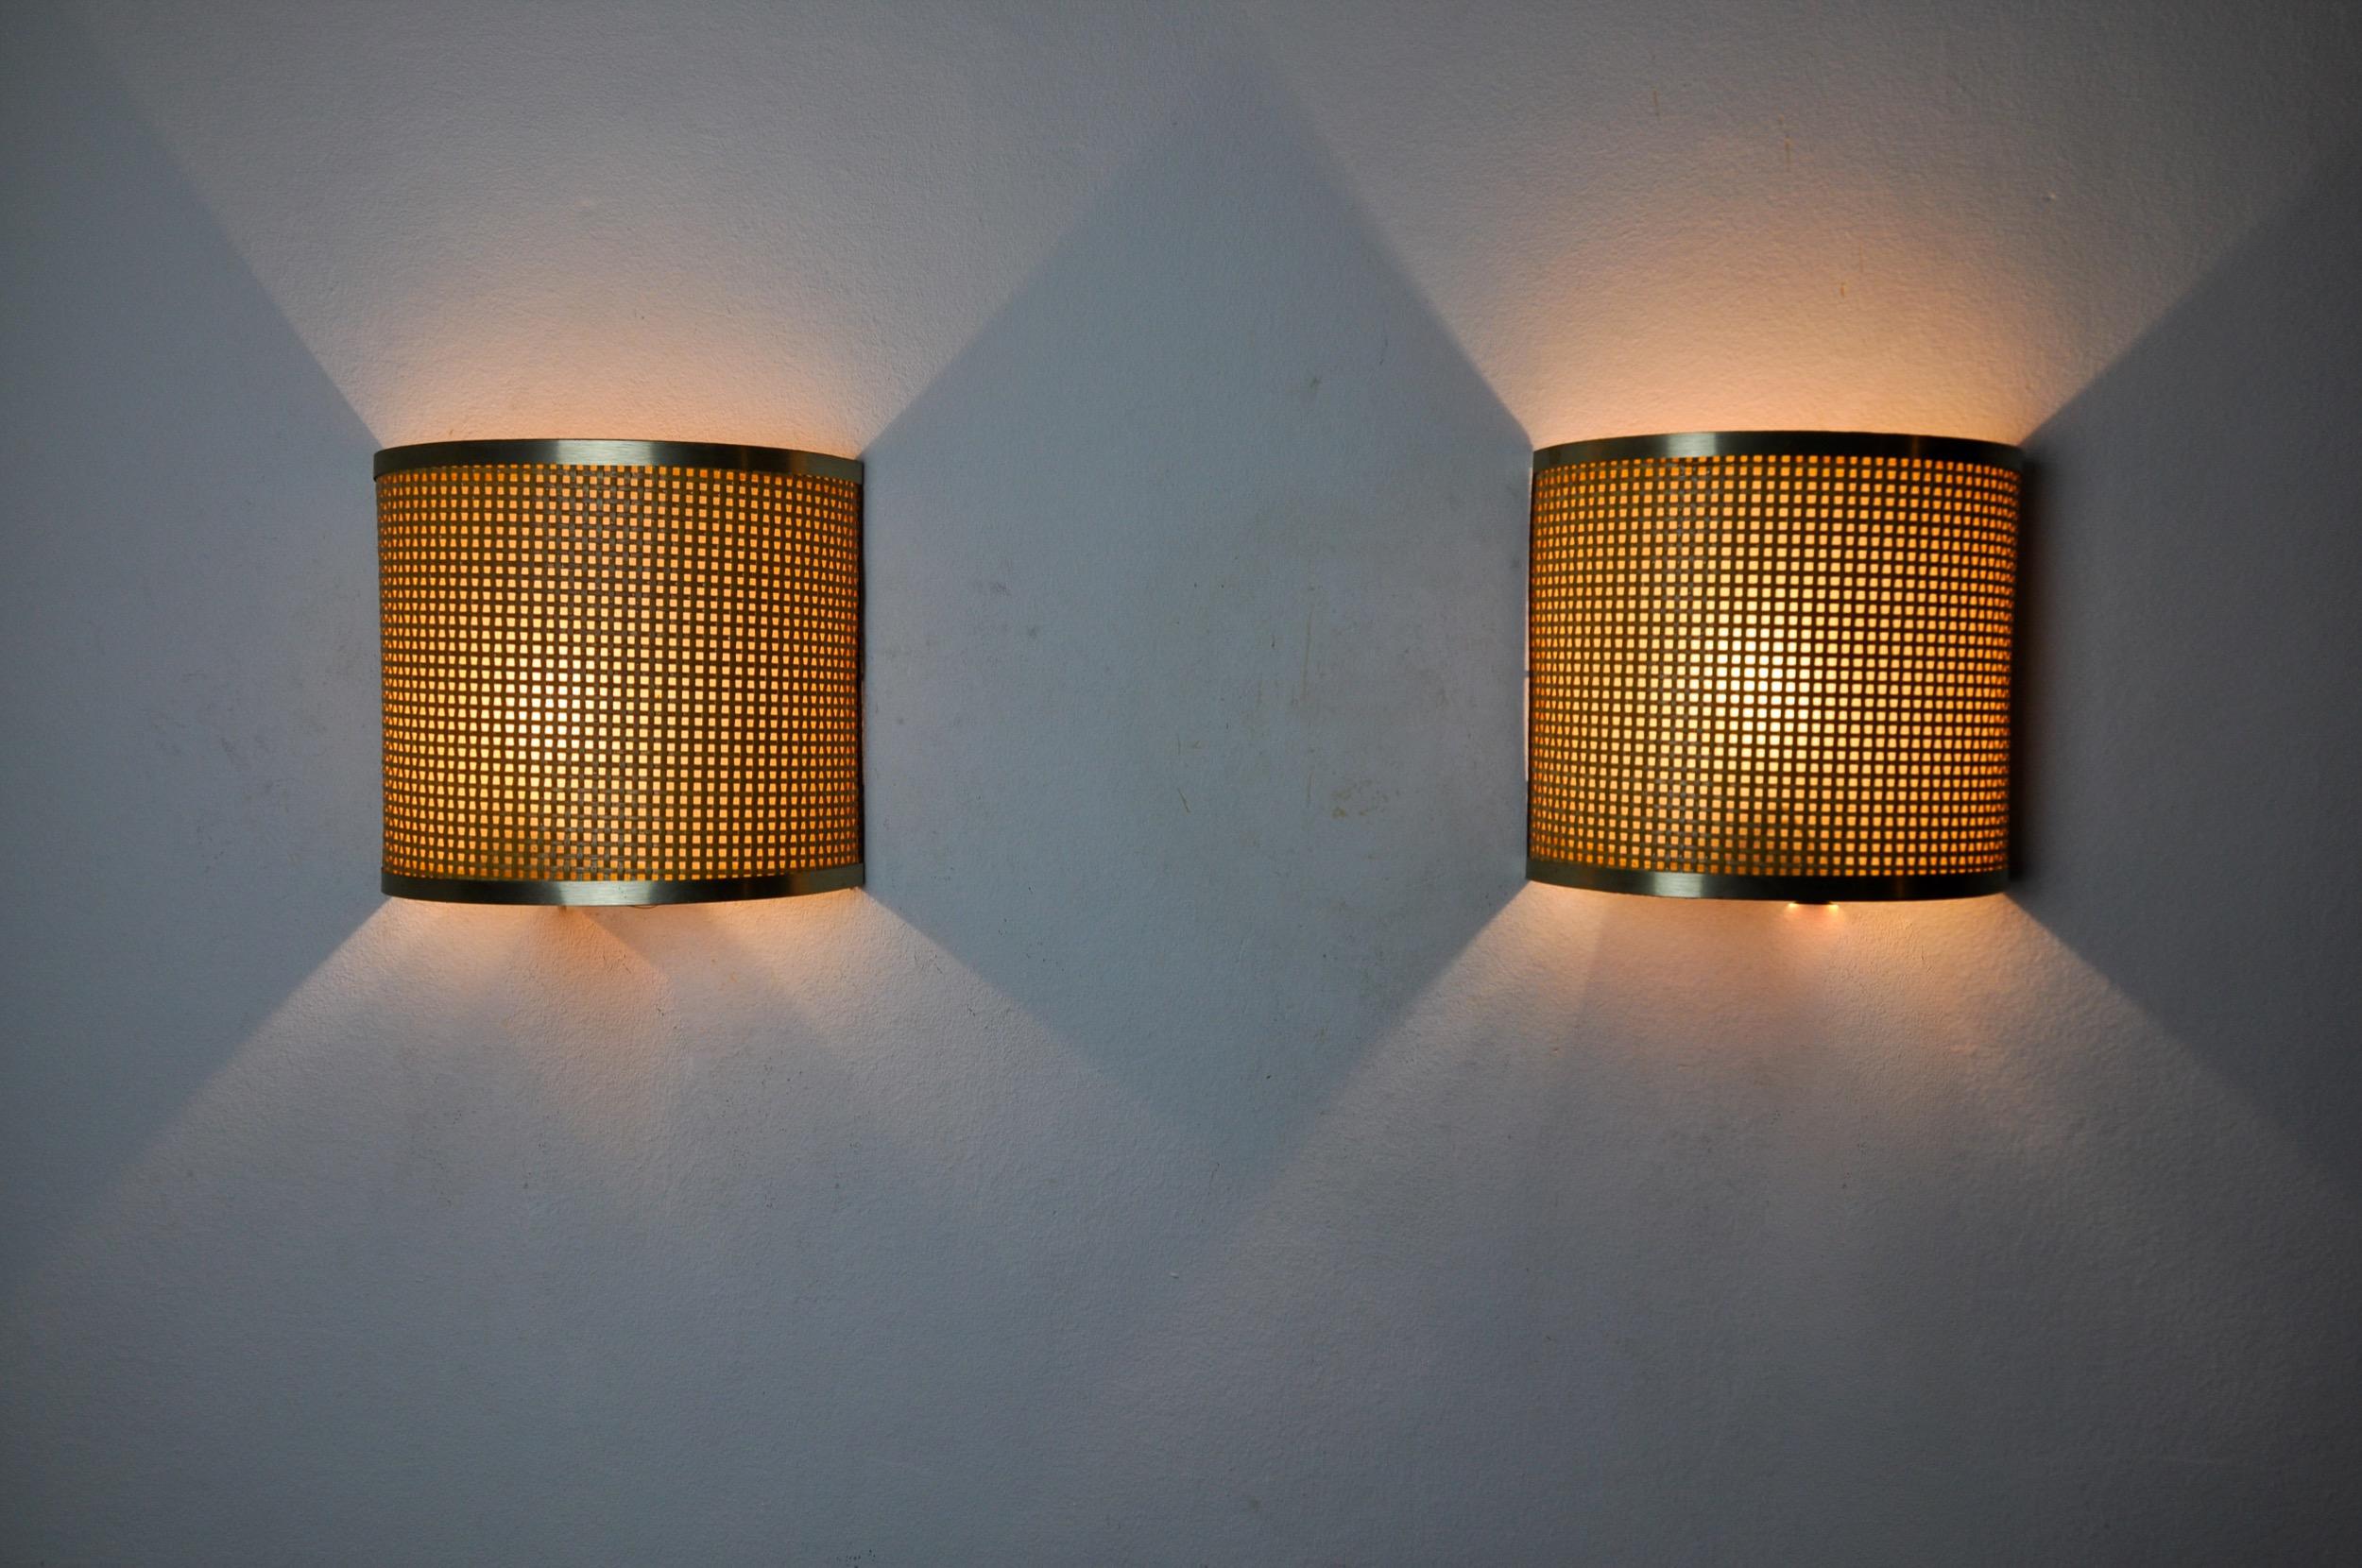 Superb and rare pair of rattan and brass wall lamps designed and produced in italy in the 1960s. A classic design that will illuminate your interior perfectly. Verified electricity, time mark consistent with the age of the object. Unique design